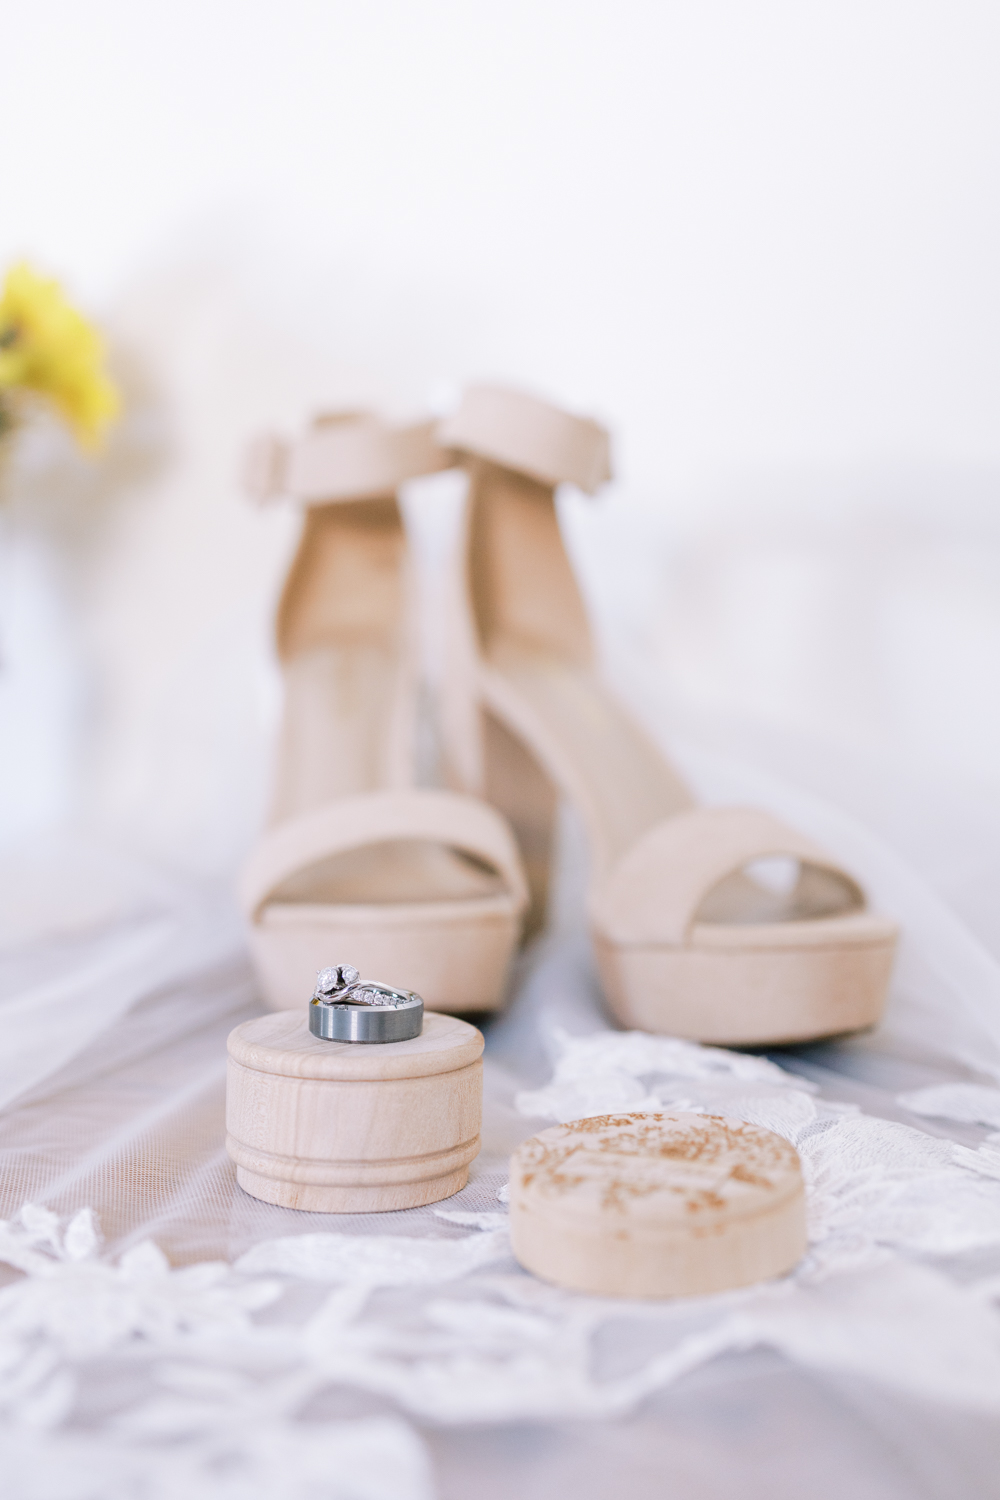 wedding rings with heels behind them and wedding veil in background